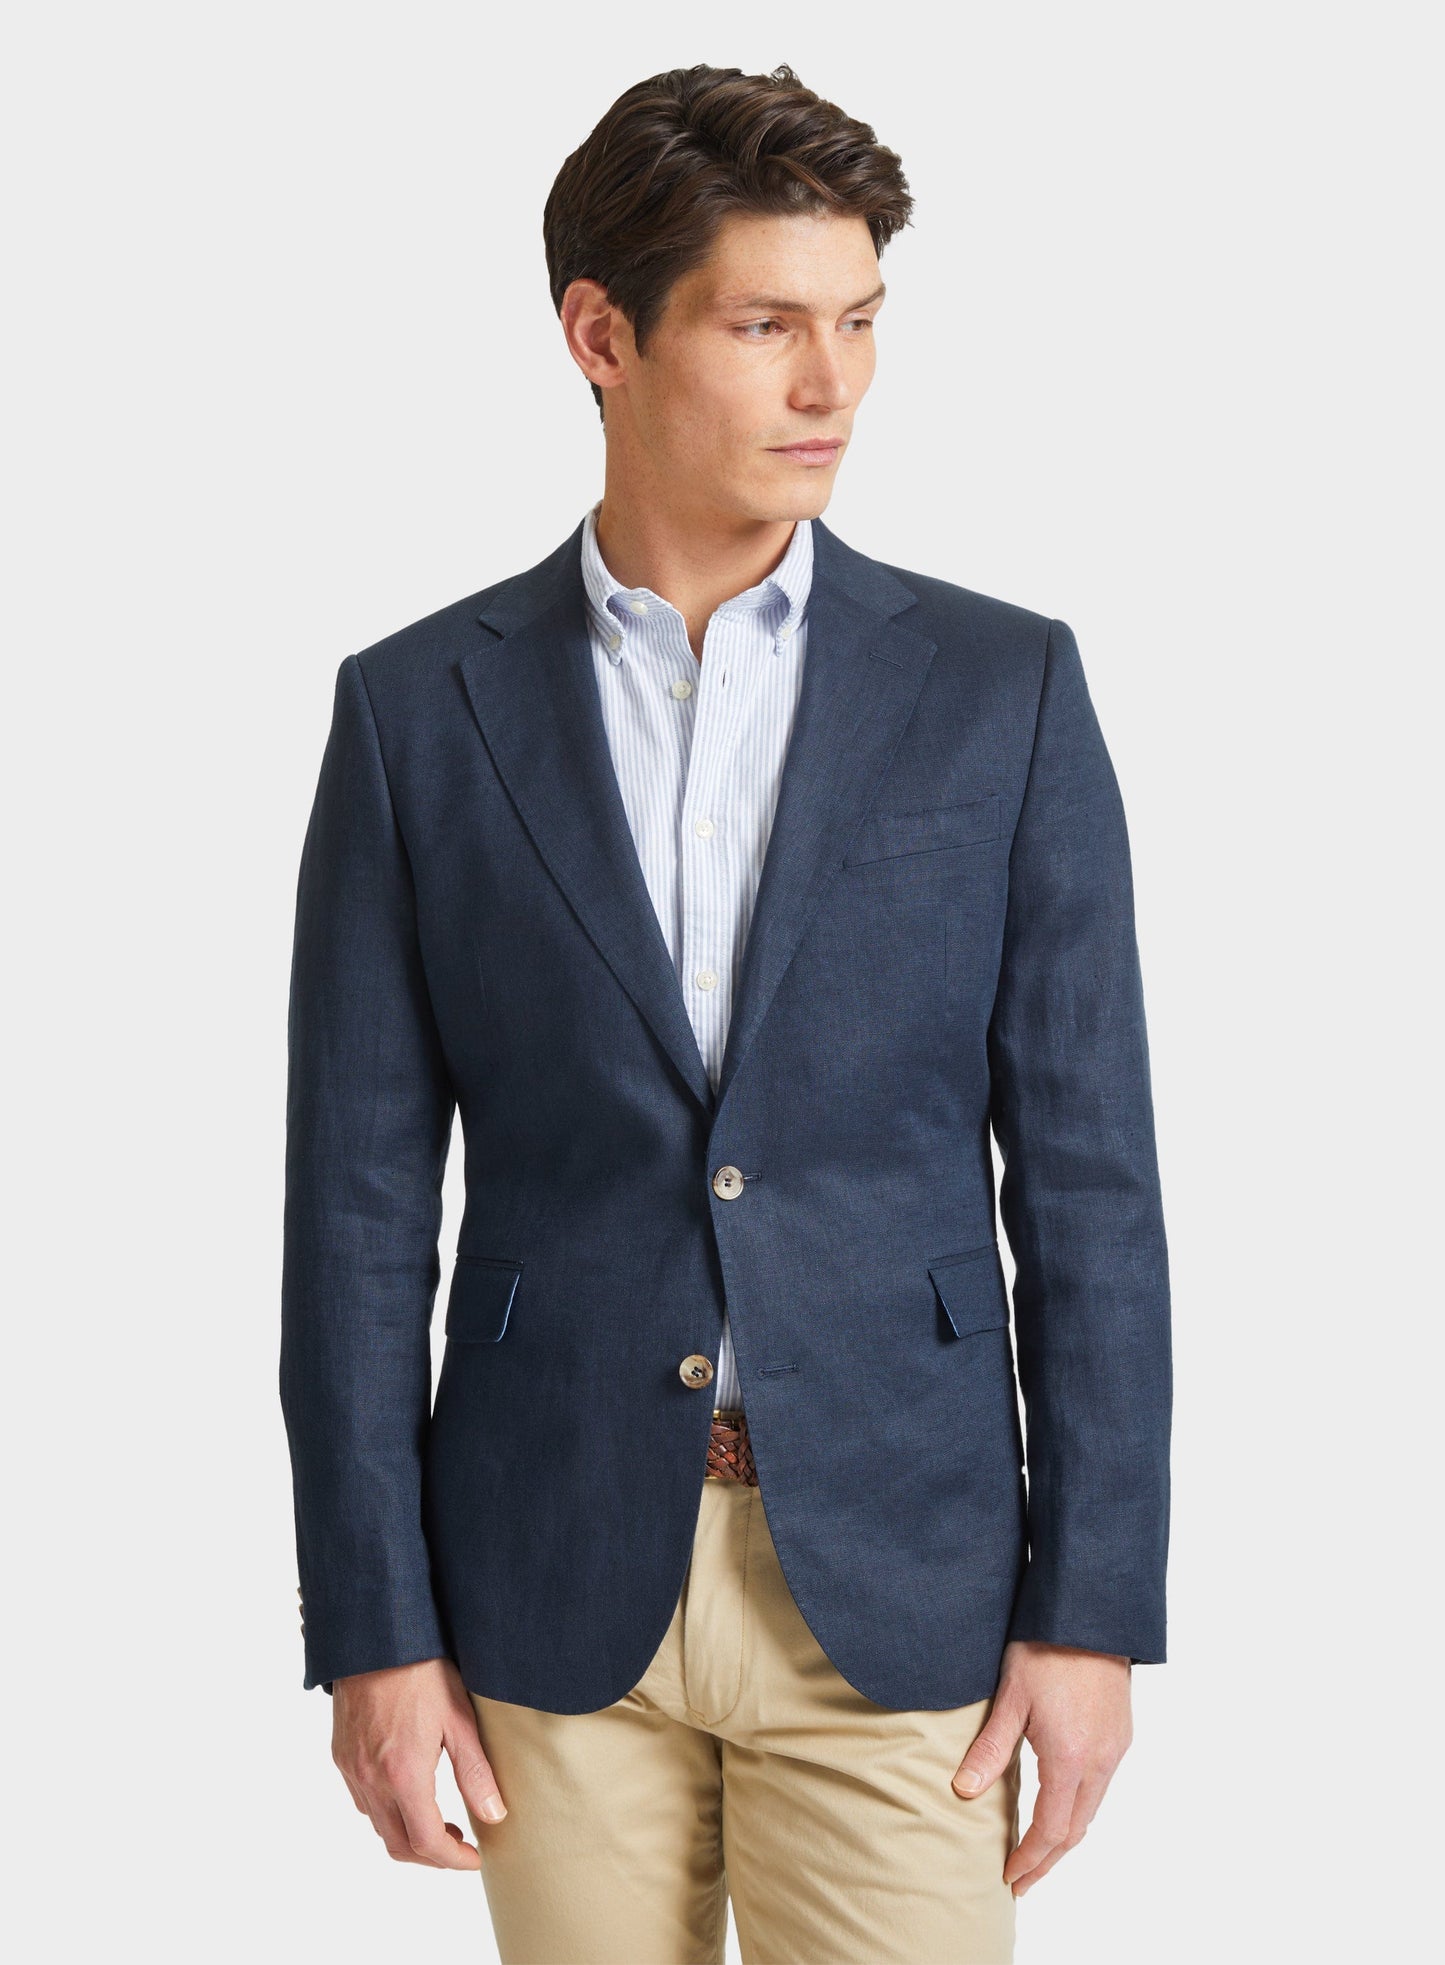 Mens Linen Jacket in Navy - Oxford Shirt Co.